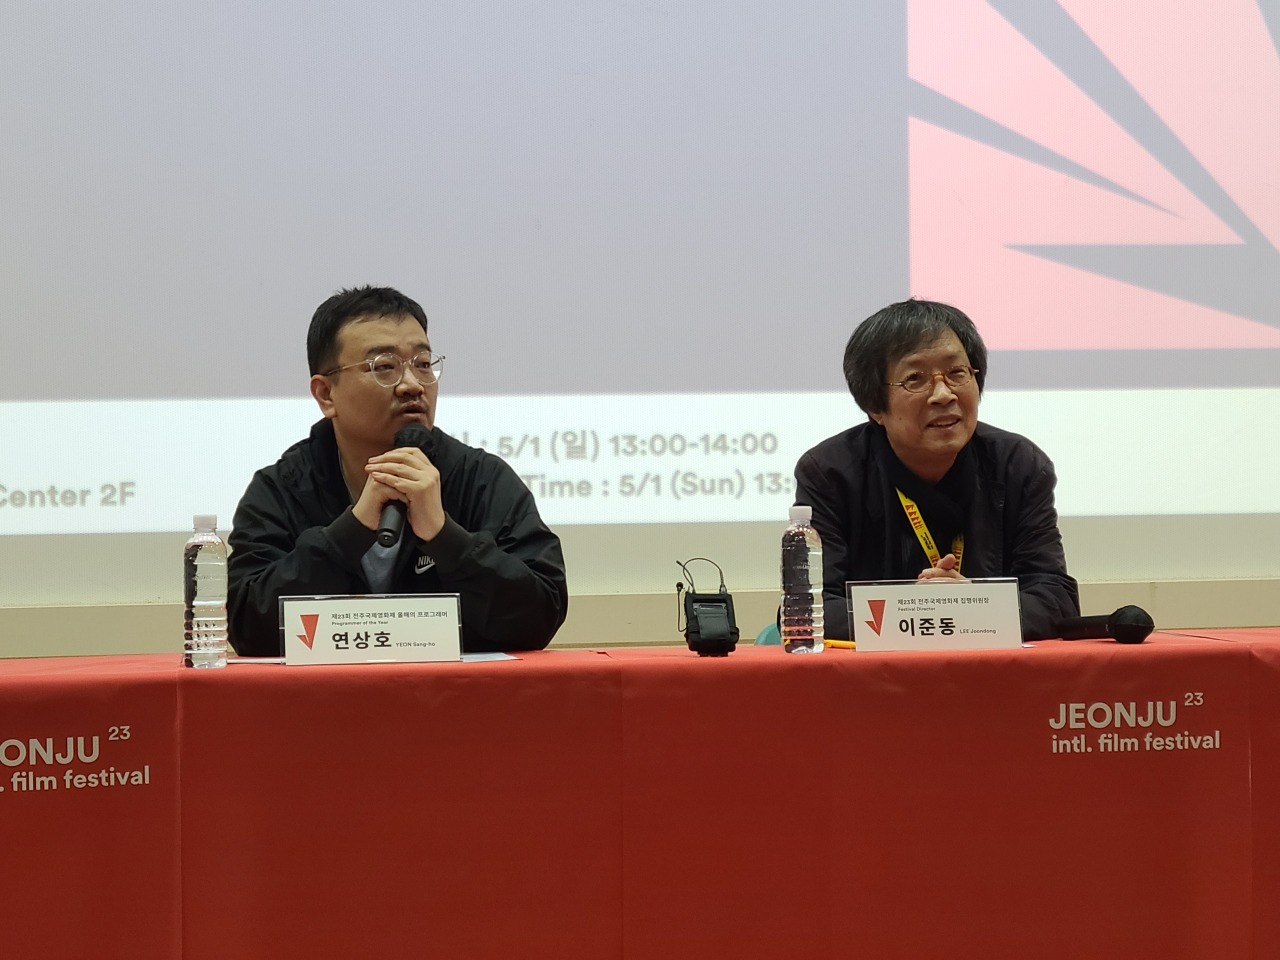 Director Yeon Sang-ho (left) and Jeonju International Film Festival director Lee Joon-dong talk during a press conference for “J Special: Programmer of the Year” held at the Jeonju Jungbu Vision Center in Jeonju , North Jeolla Province, on Sunday.  (Song Seung-hyun/The Korea Herald)